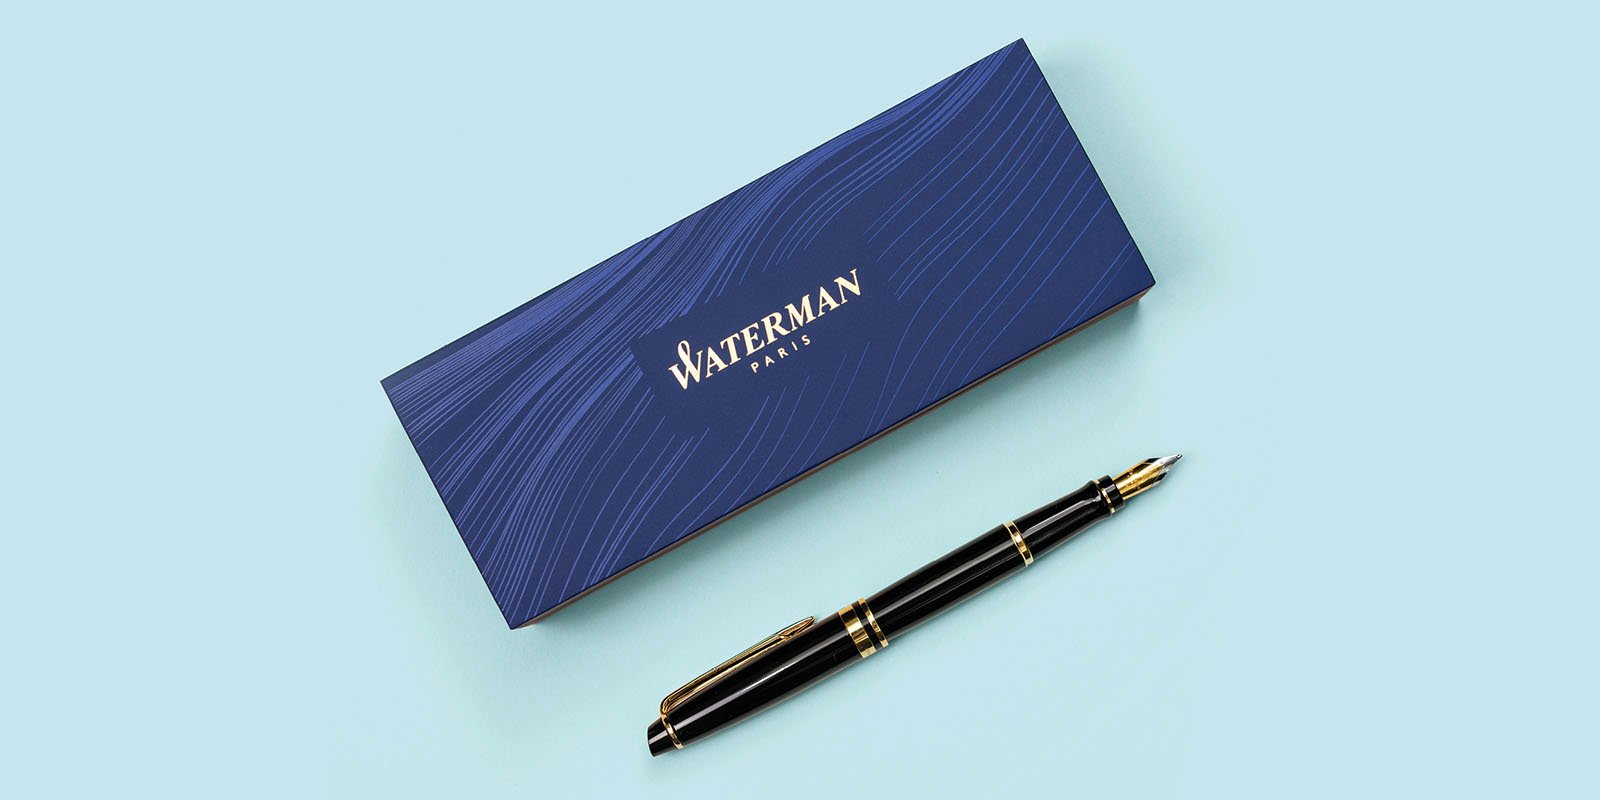 An Expert fountain pen next to a closed gift box.